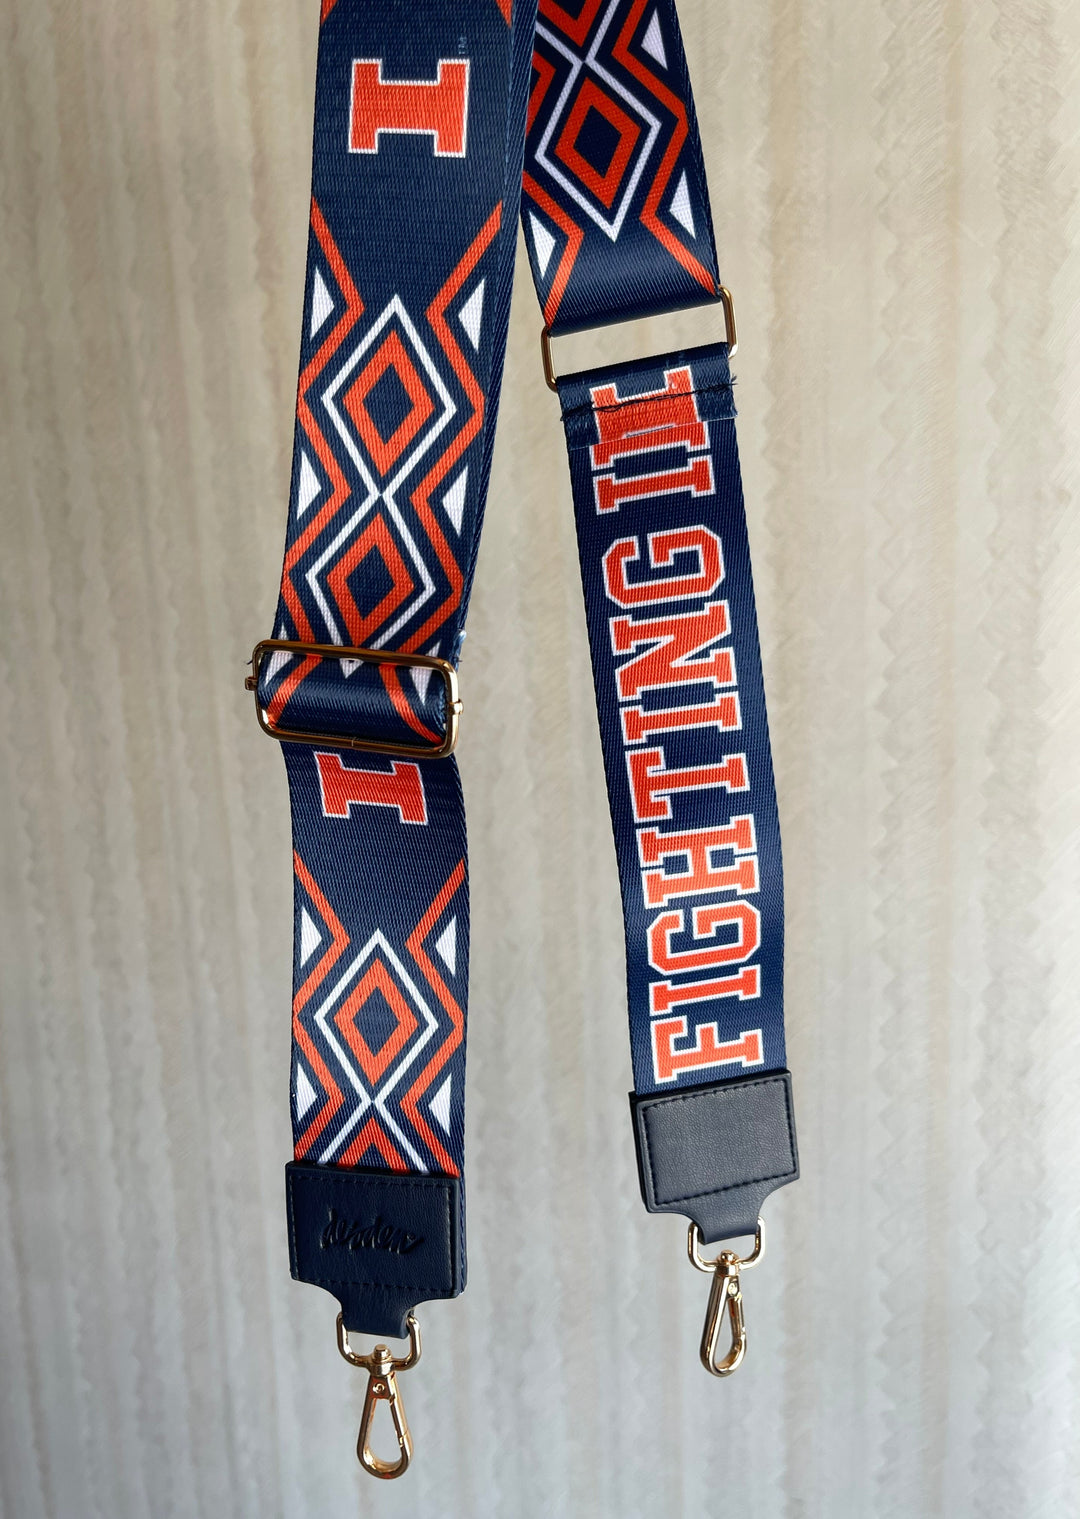 Illinois Purse Strap with Orange and Blue Aztec Print. Illinois Game Day Accessories.